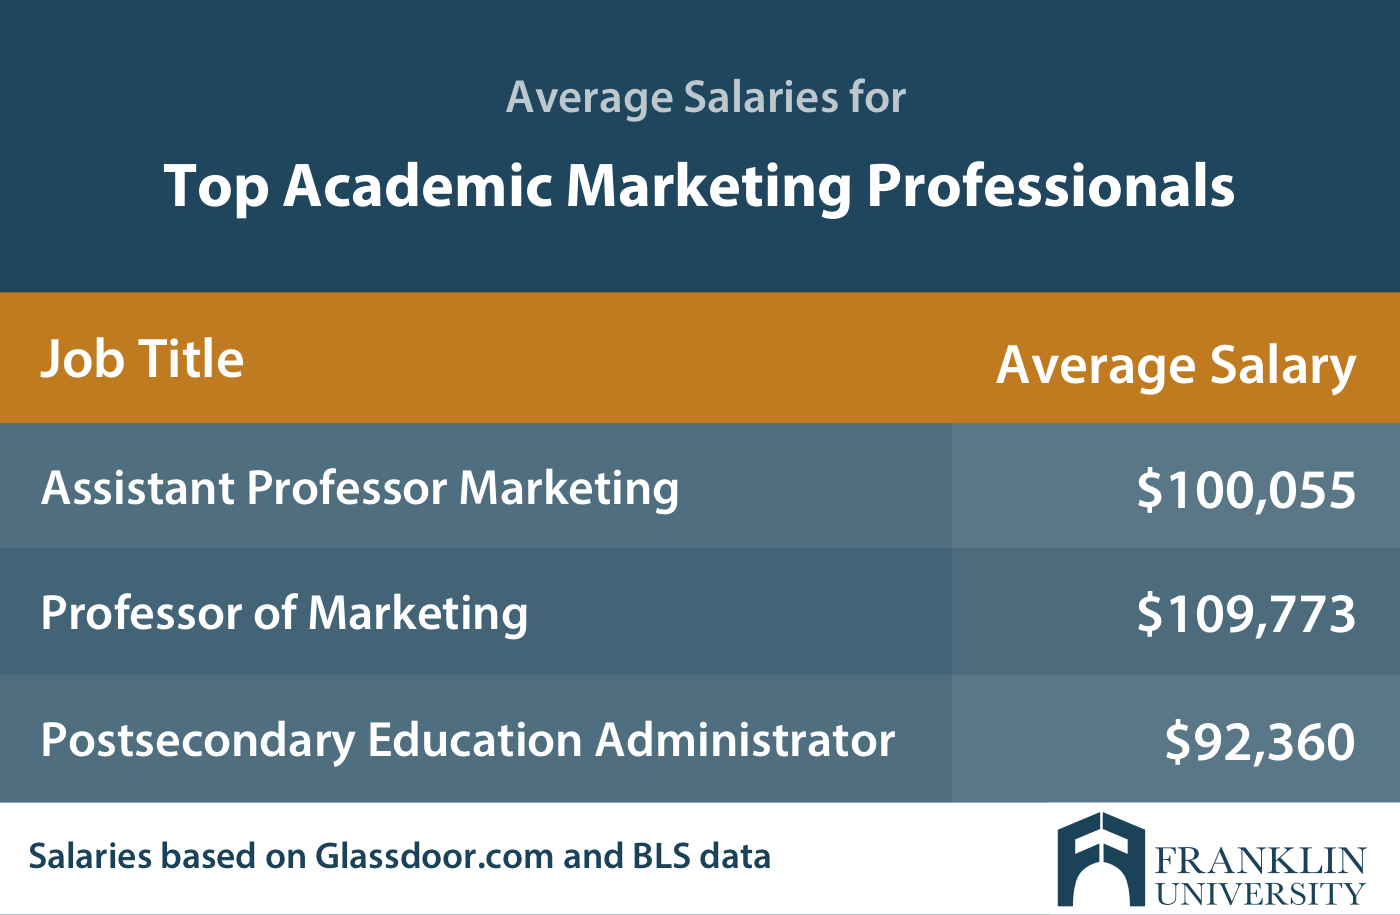 graphic describing the average salaries for top academic marketing professionals